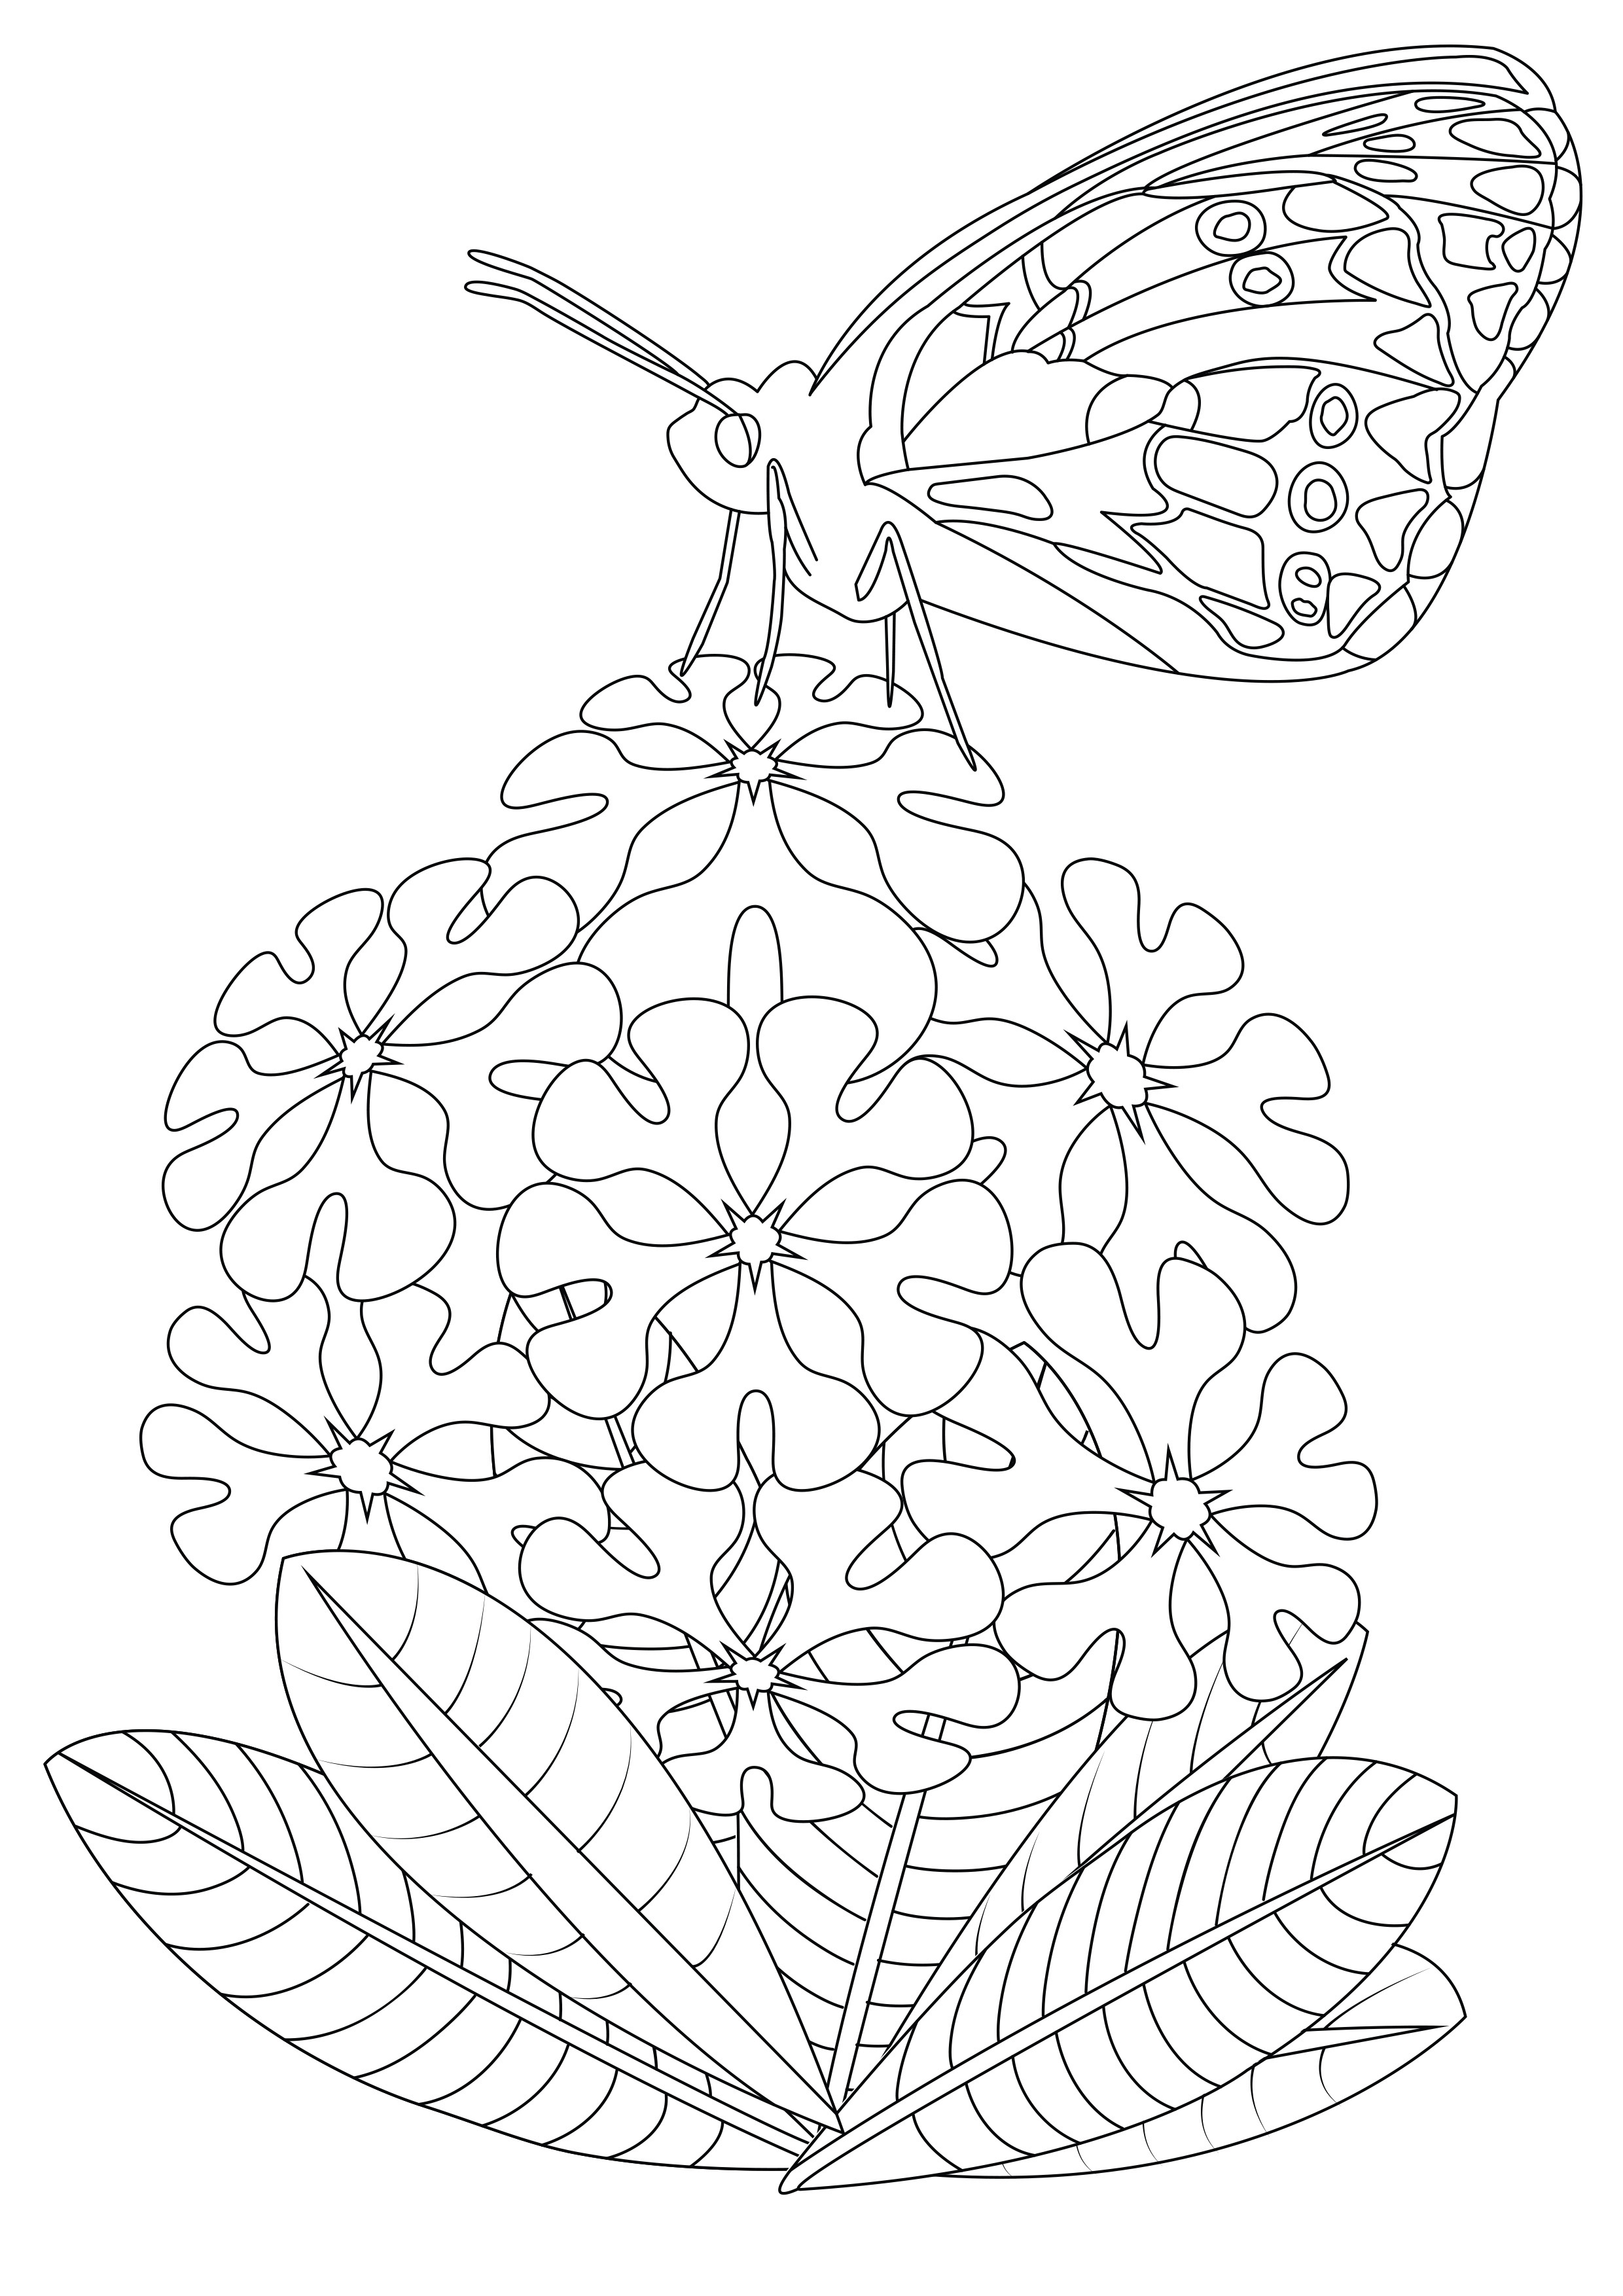 Butterfly & flowers, from the coloring book 'Butterfly garden', by Emma L Williams, Artist : Emma L Williams